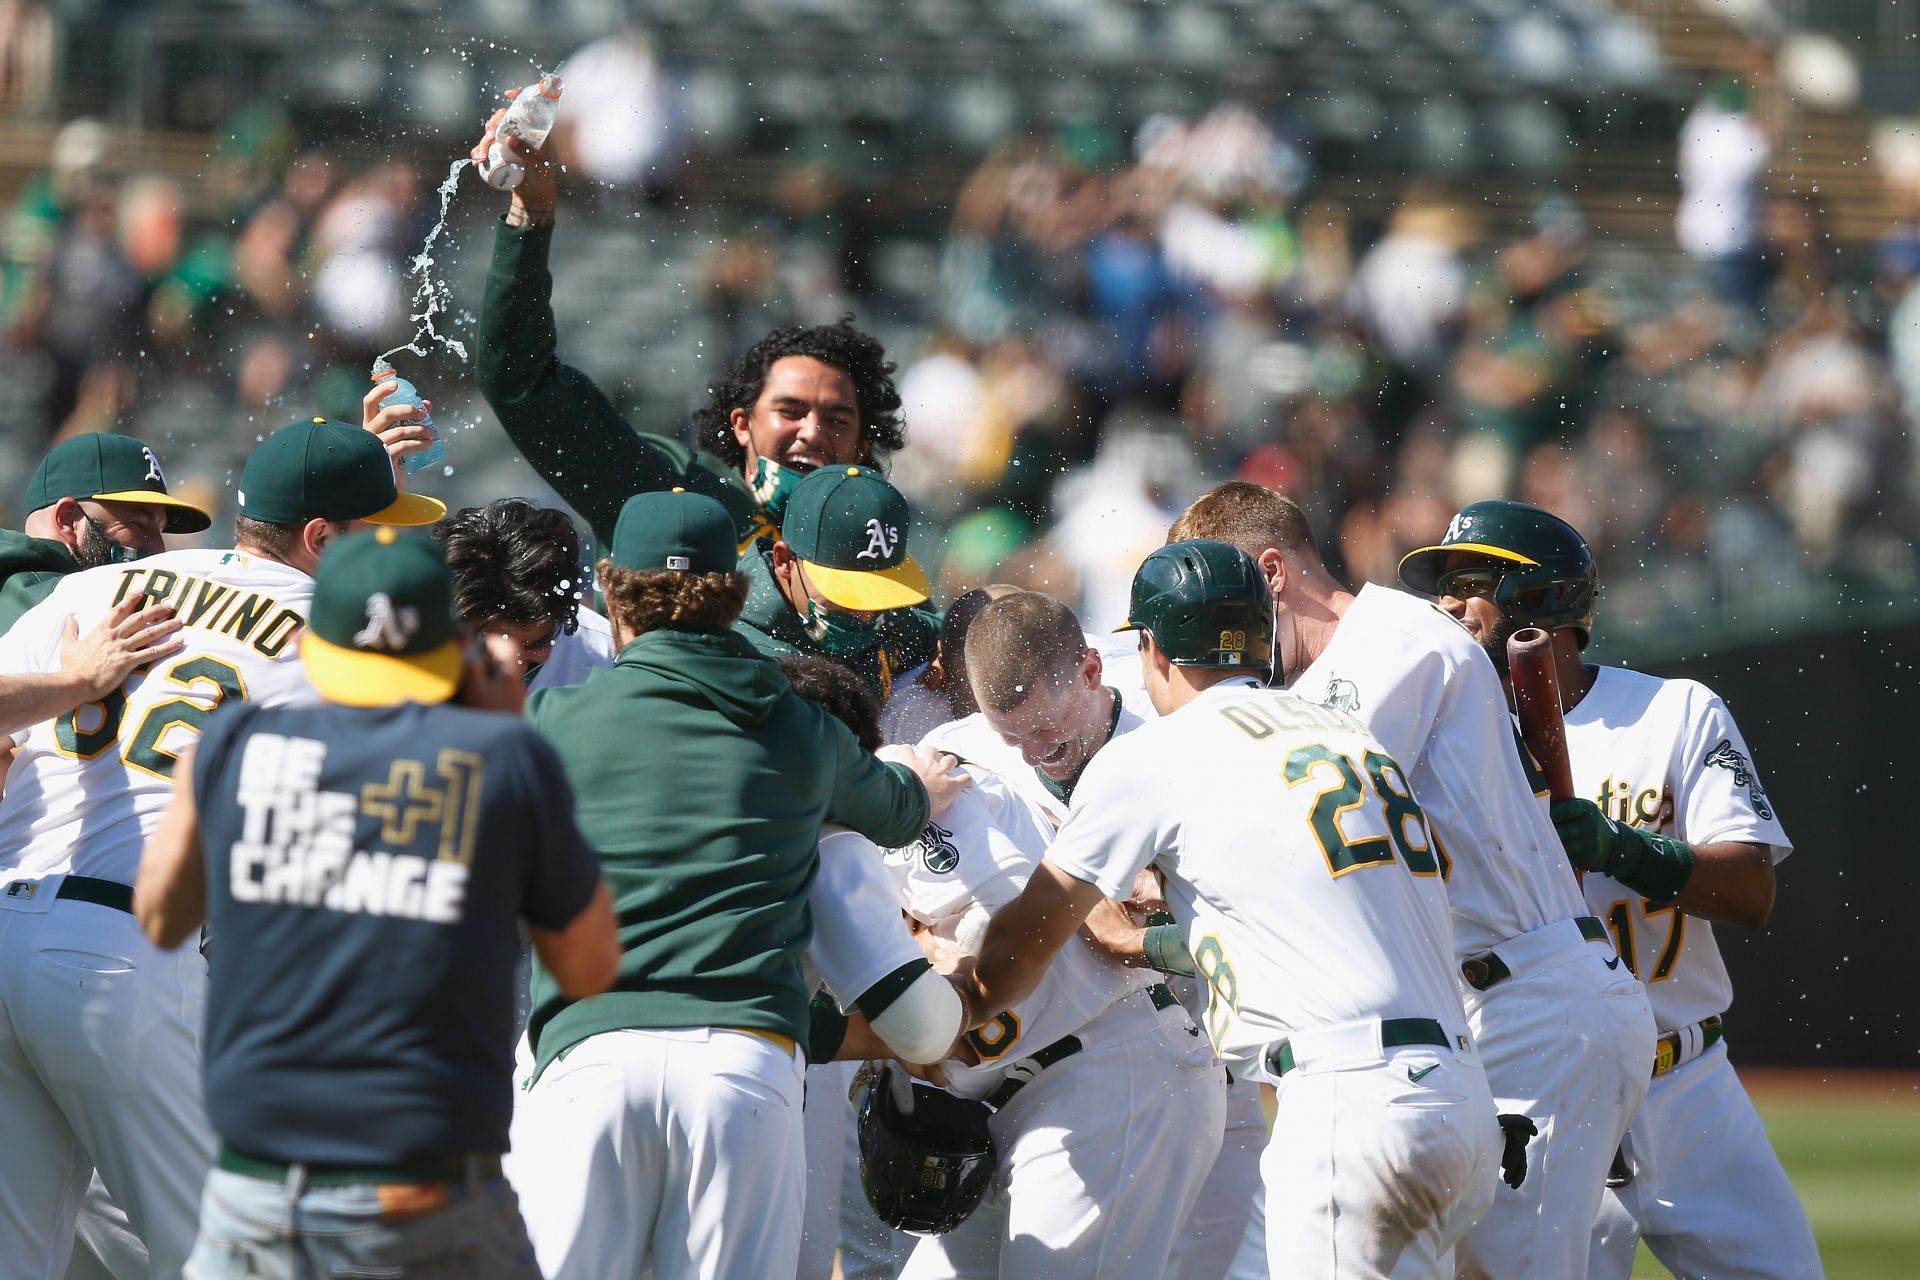 Oakland A's entire payroll now only slightly more than Max